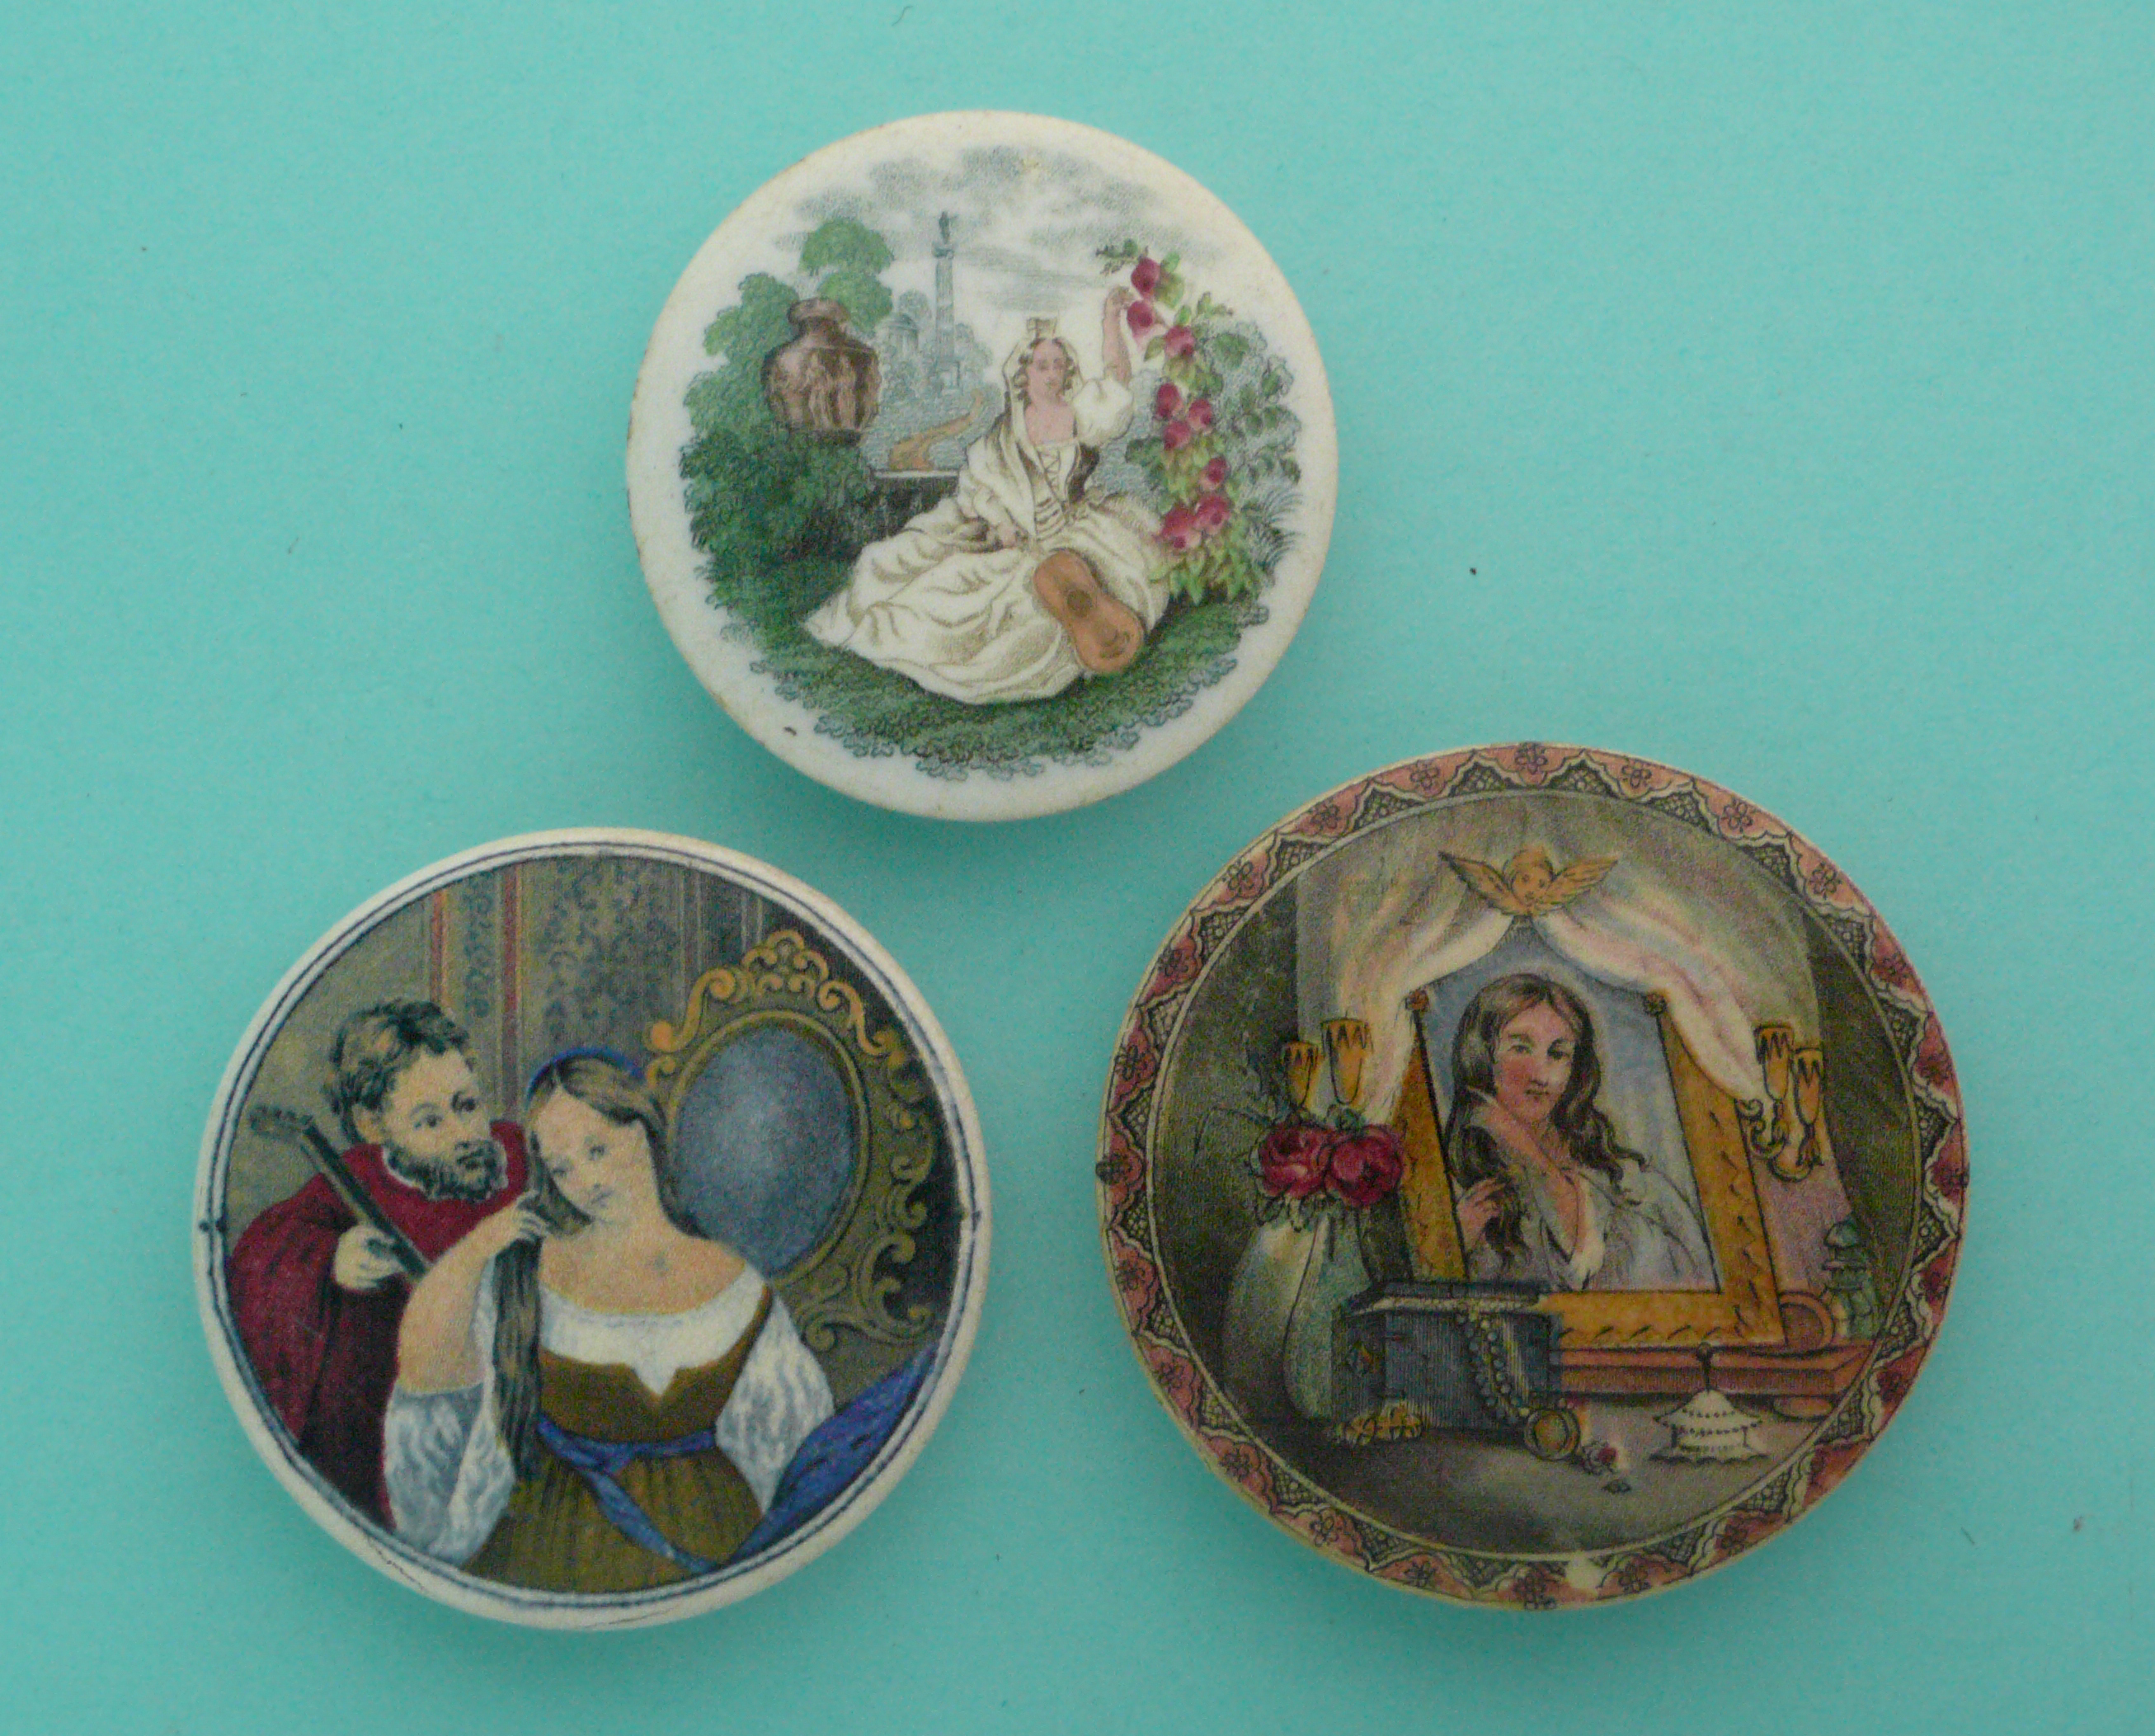 The Wooer (108) Reflection in a Mirror (104) restored and Lady with Guitar (107) (3) (Prattware, pot